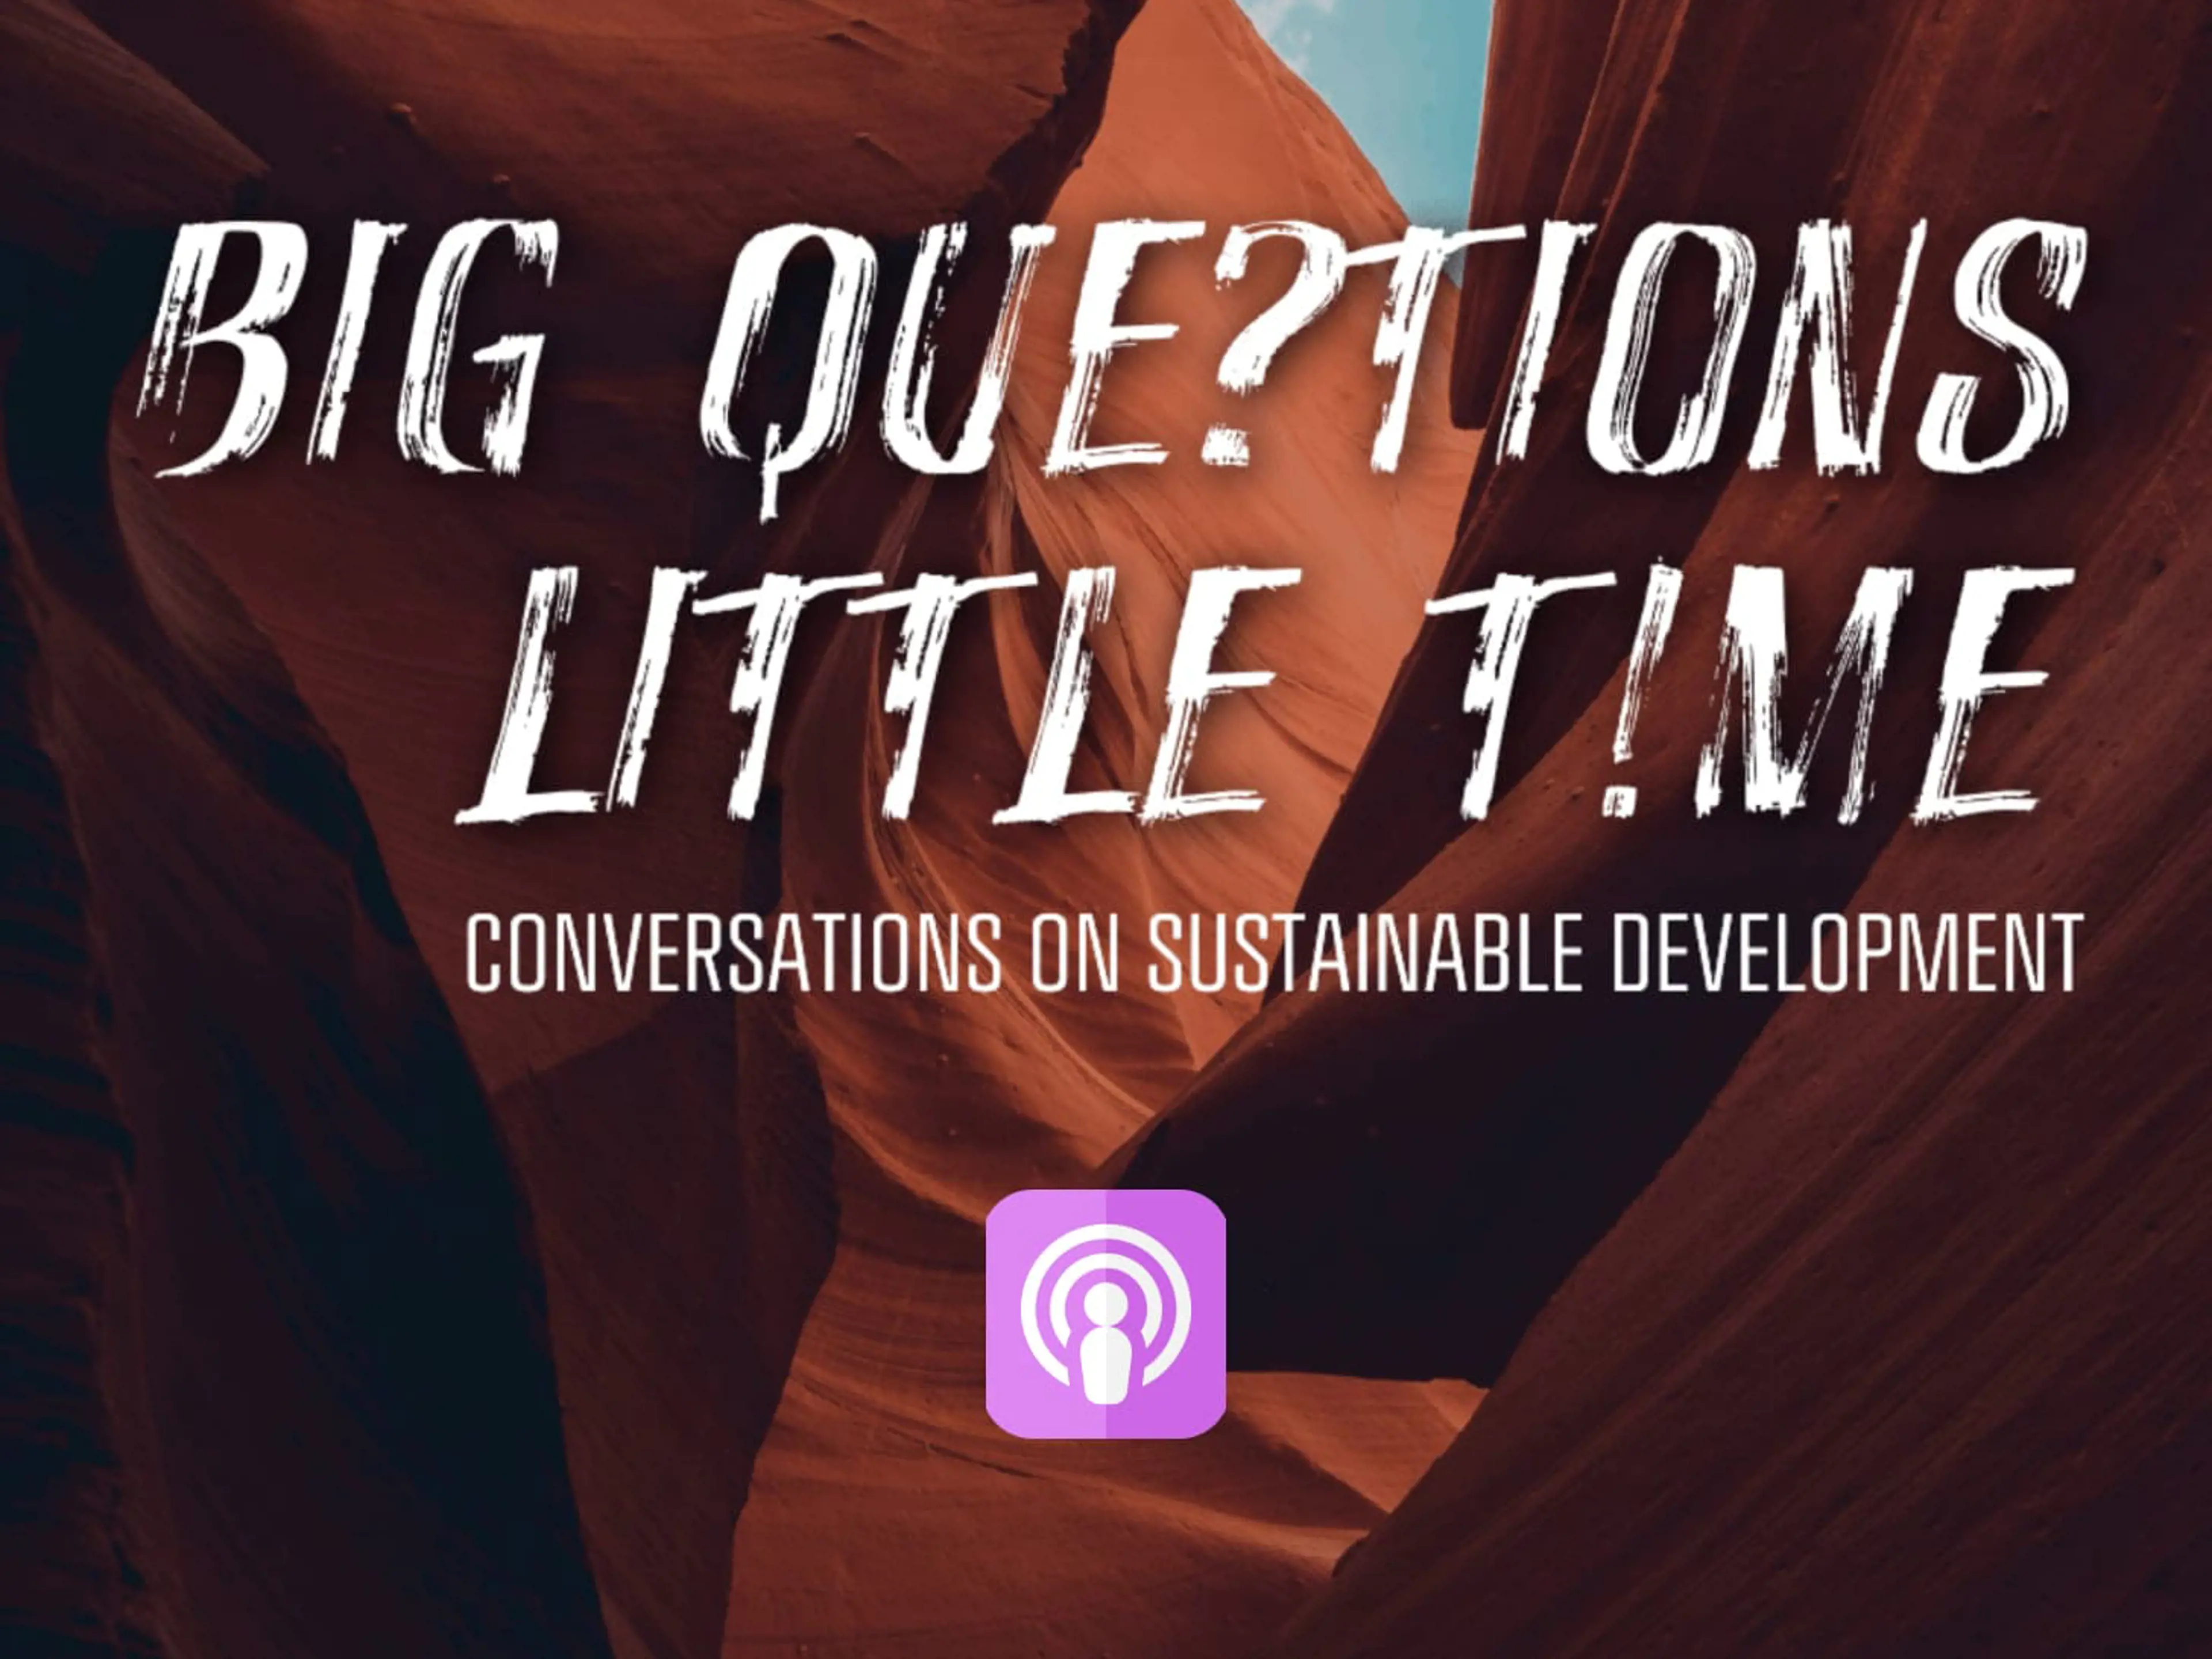 Big question little time podcast cover